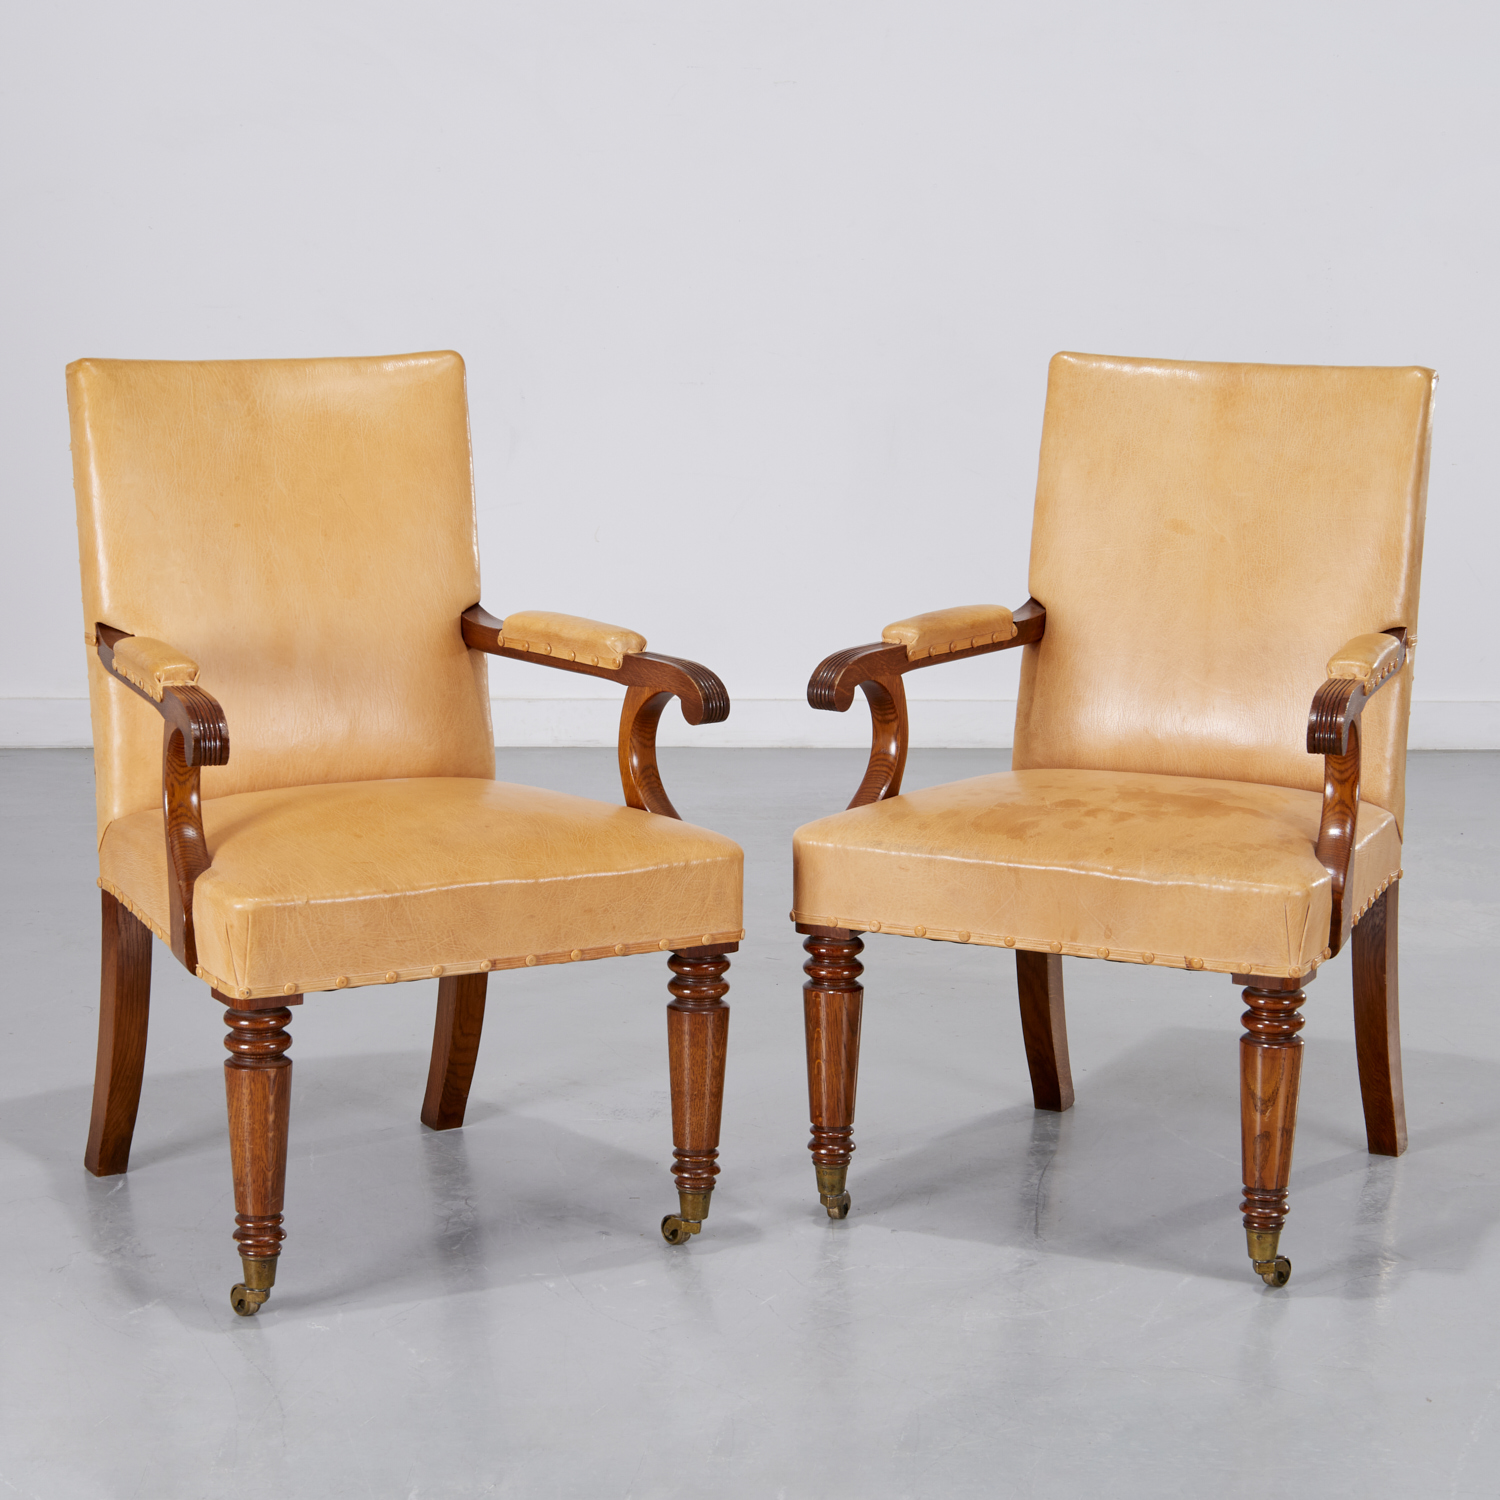 HOWE LONDON, PAIR LEATHER AND OAK